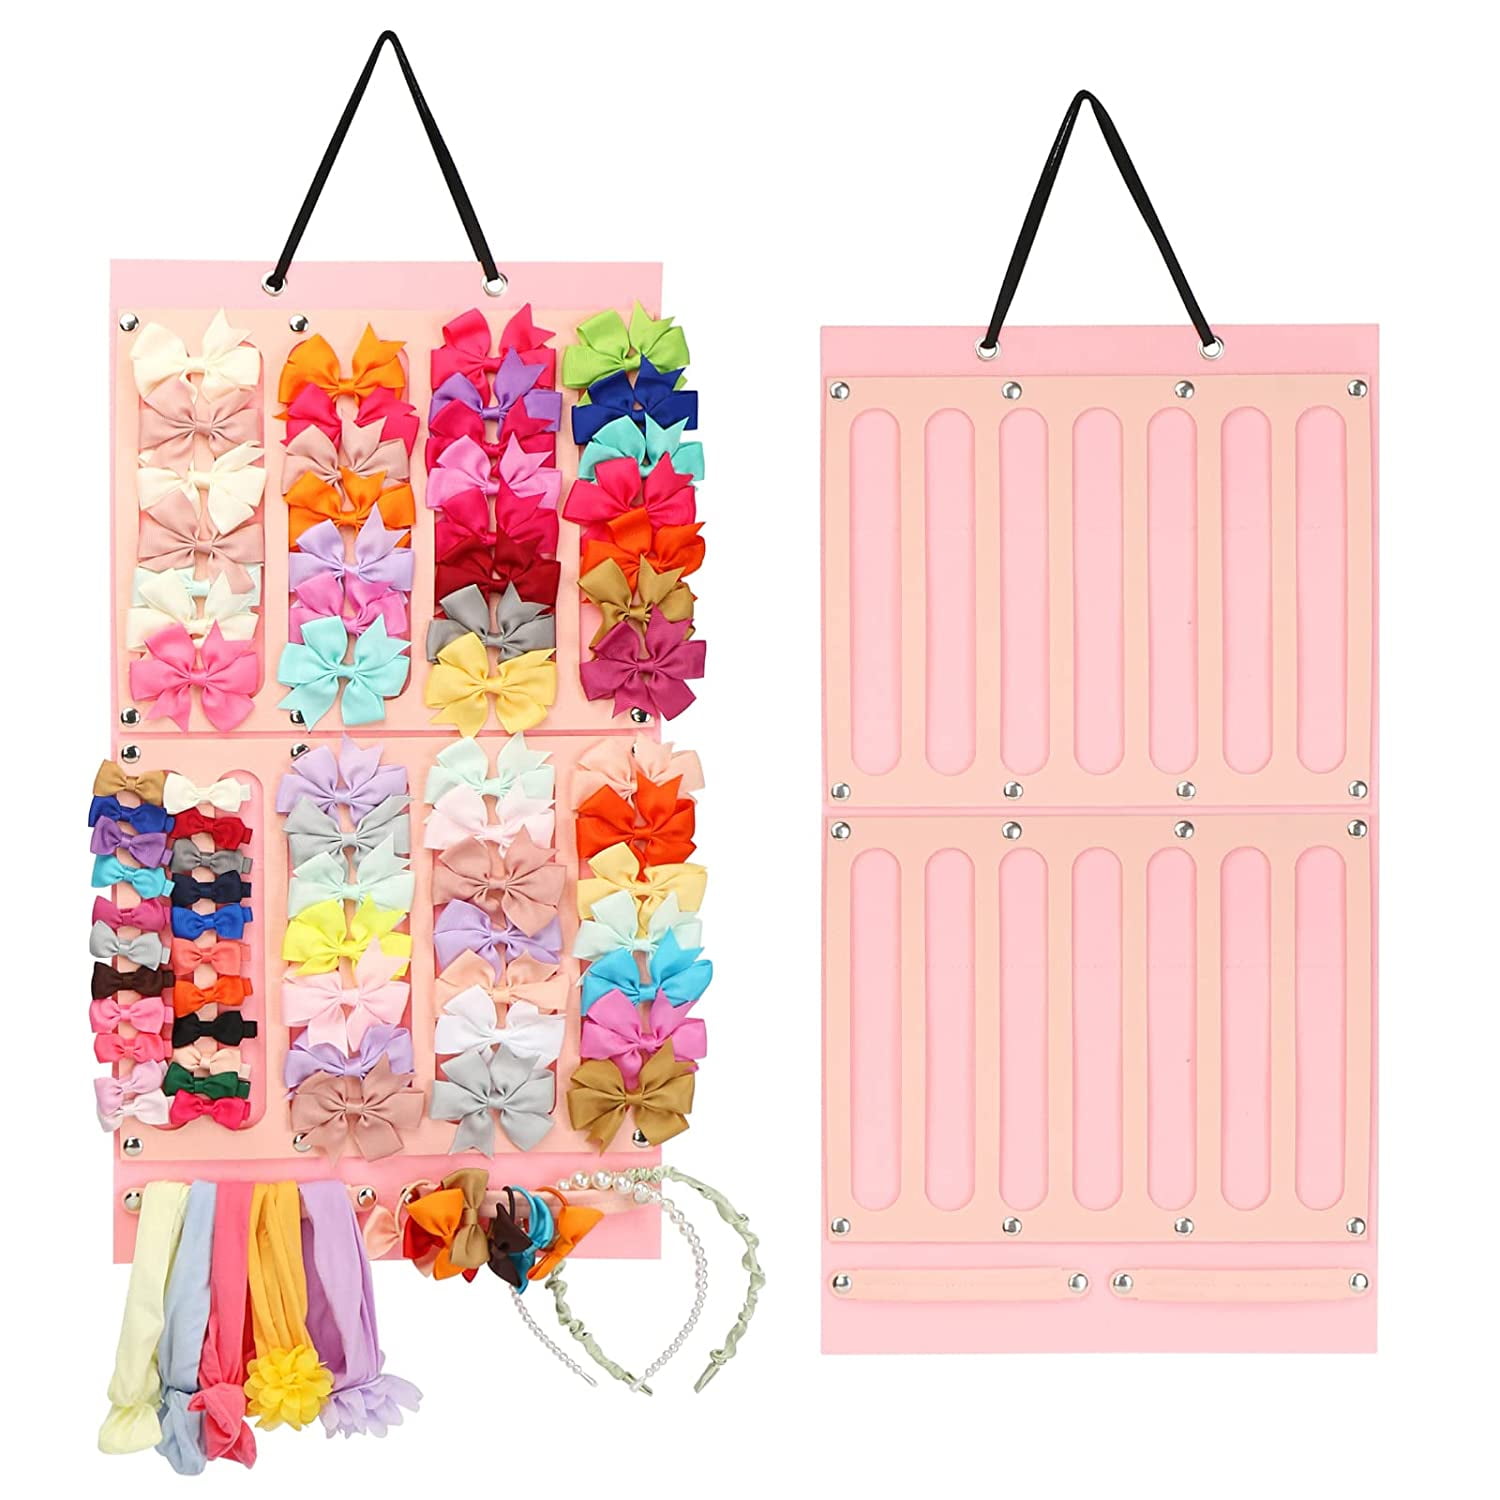 Hair Bow Holder Organizer for Girls - Pink Cotton Ribbons - Headband, Hair  Tie, Clip, Bow Organizers - Baby Hair Accessories Storage Display 